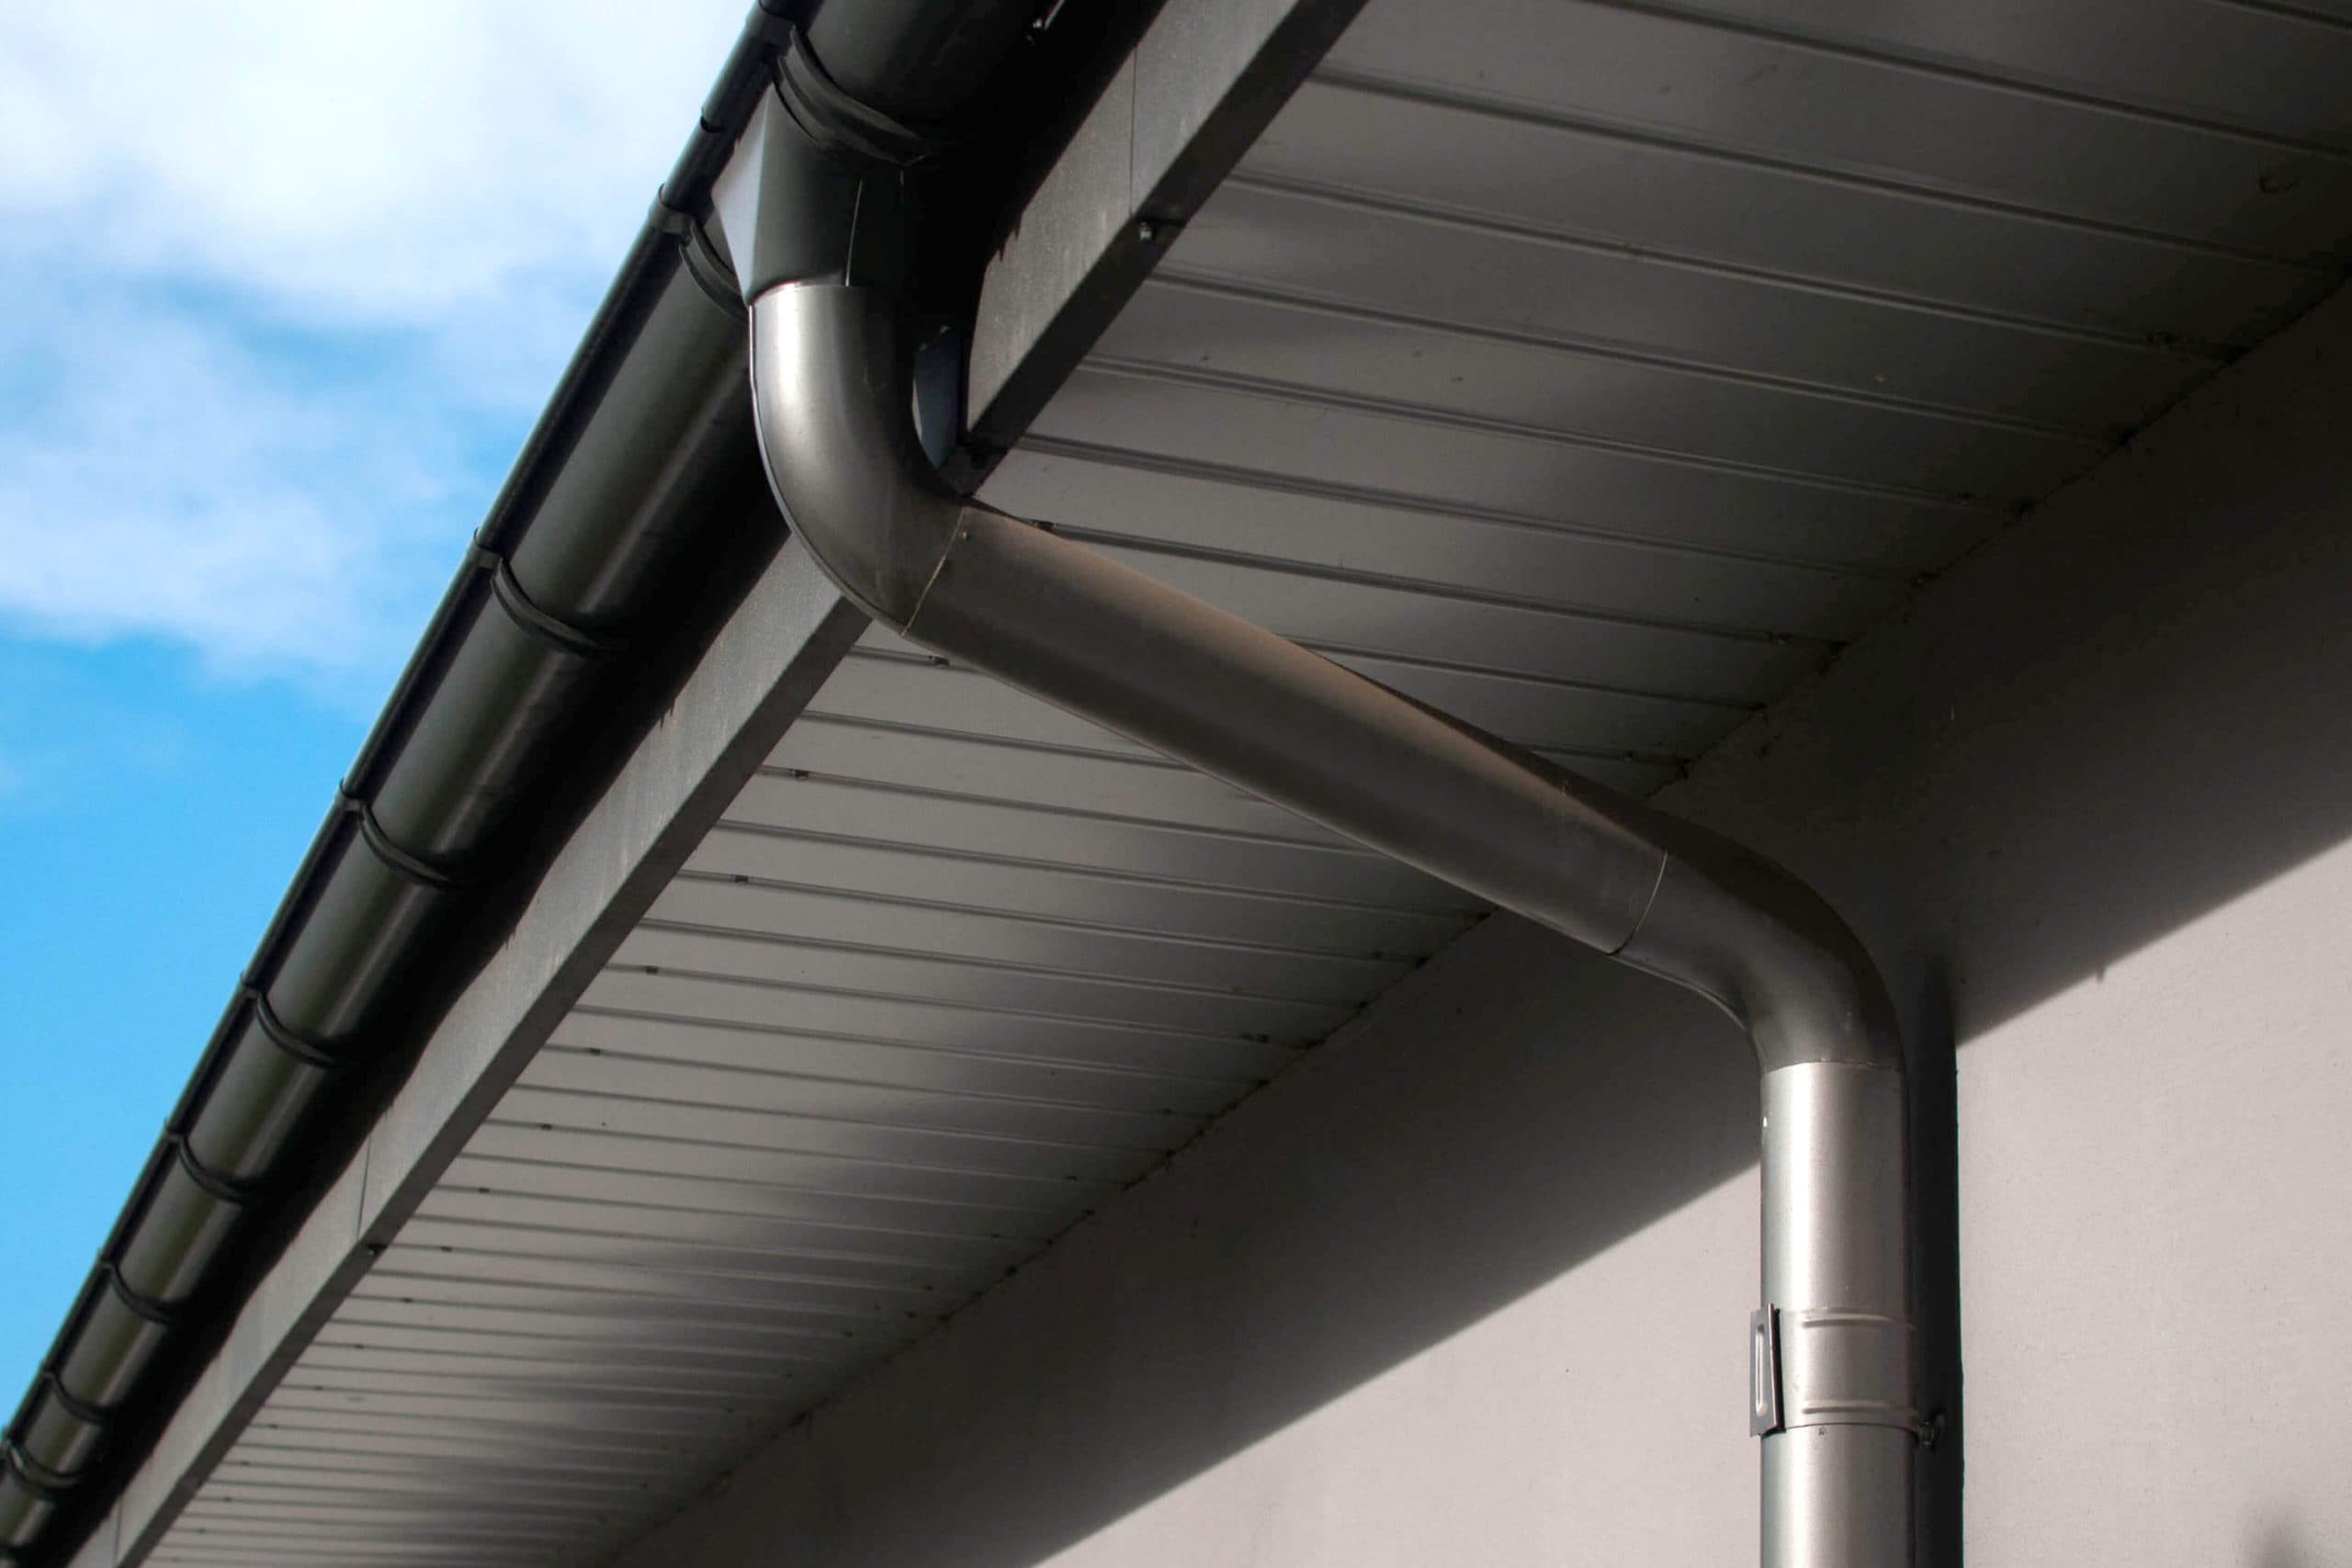 Reliable and affordable Galvanized gutters installation in Acworth